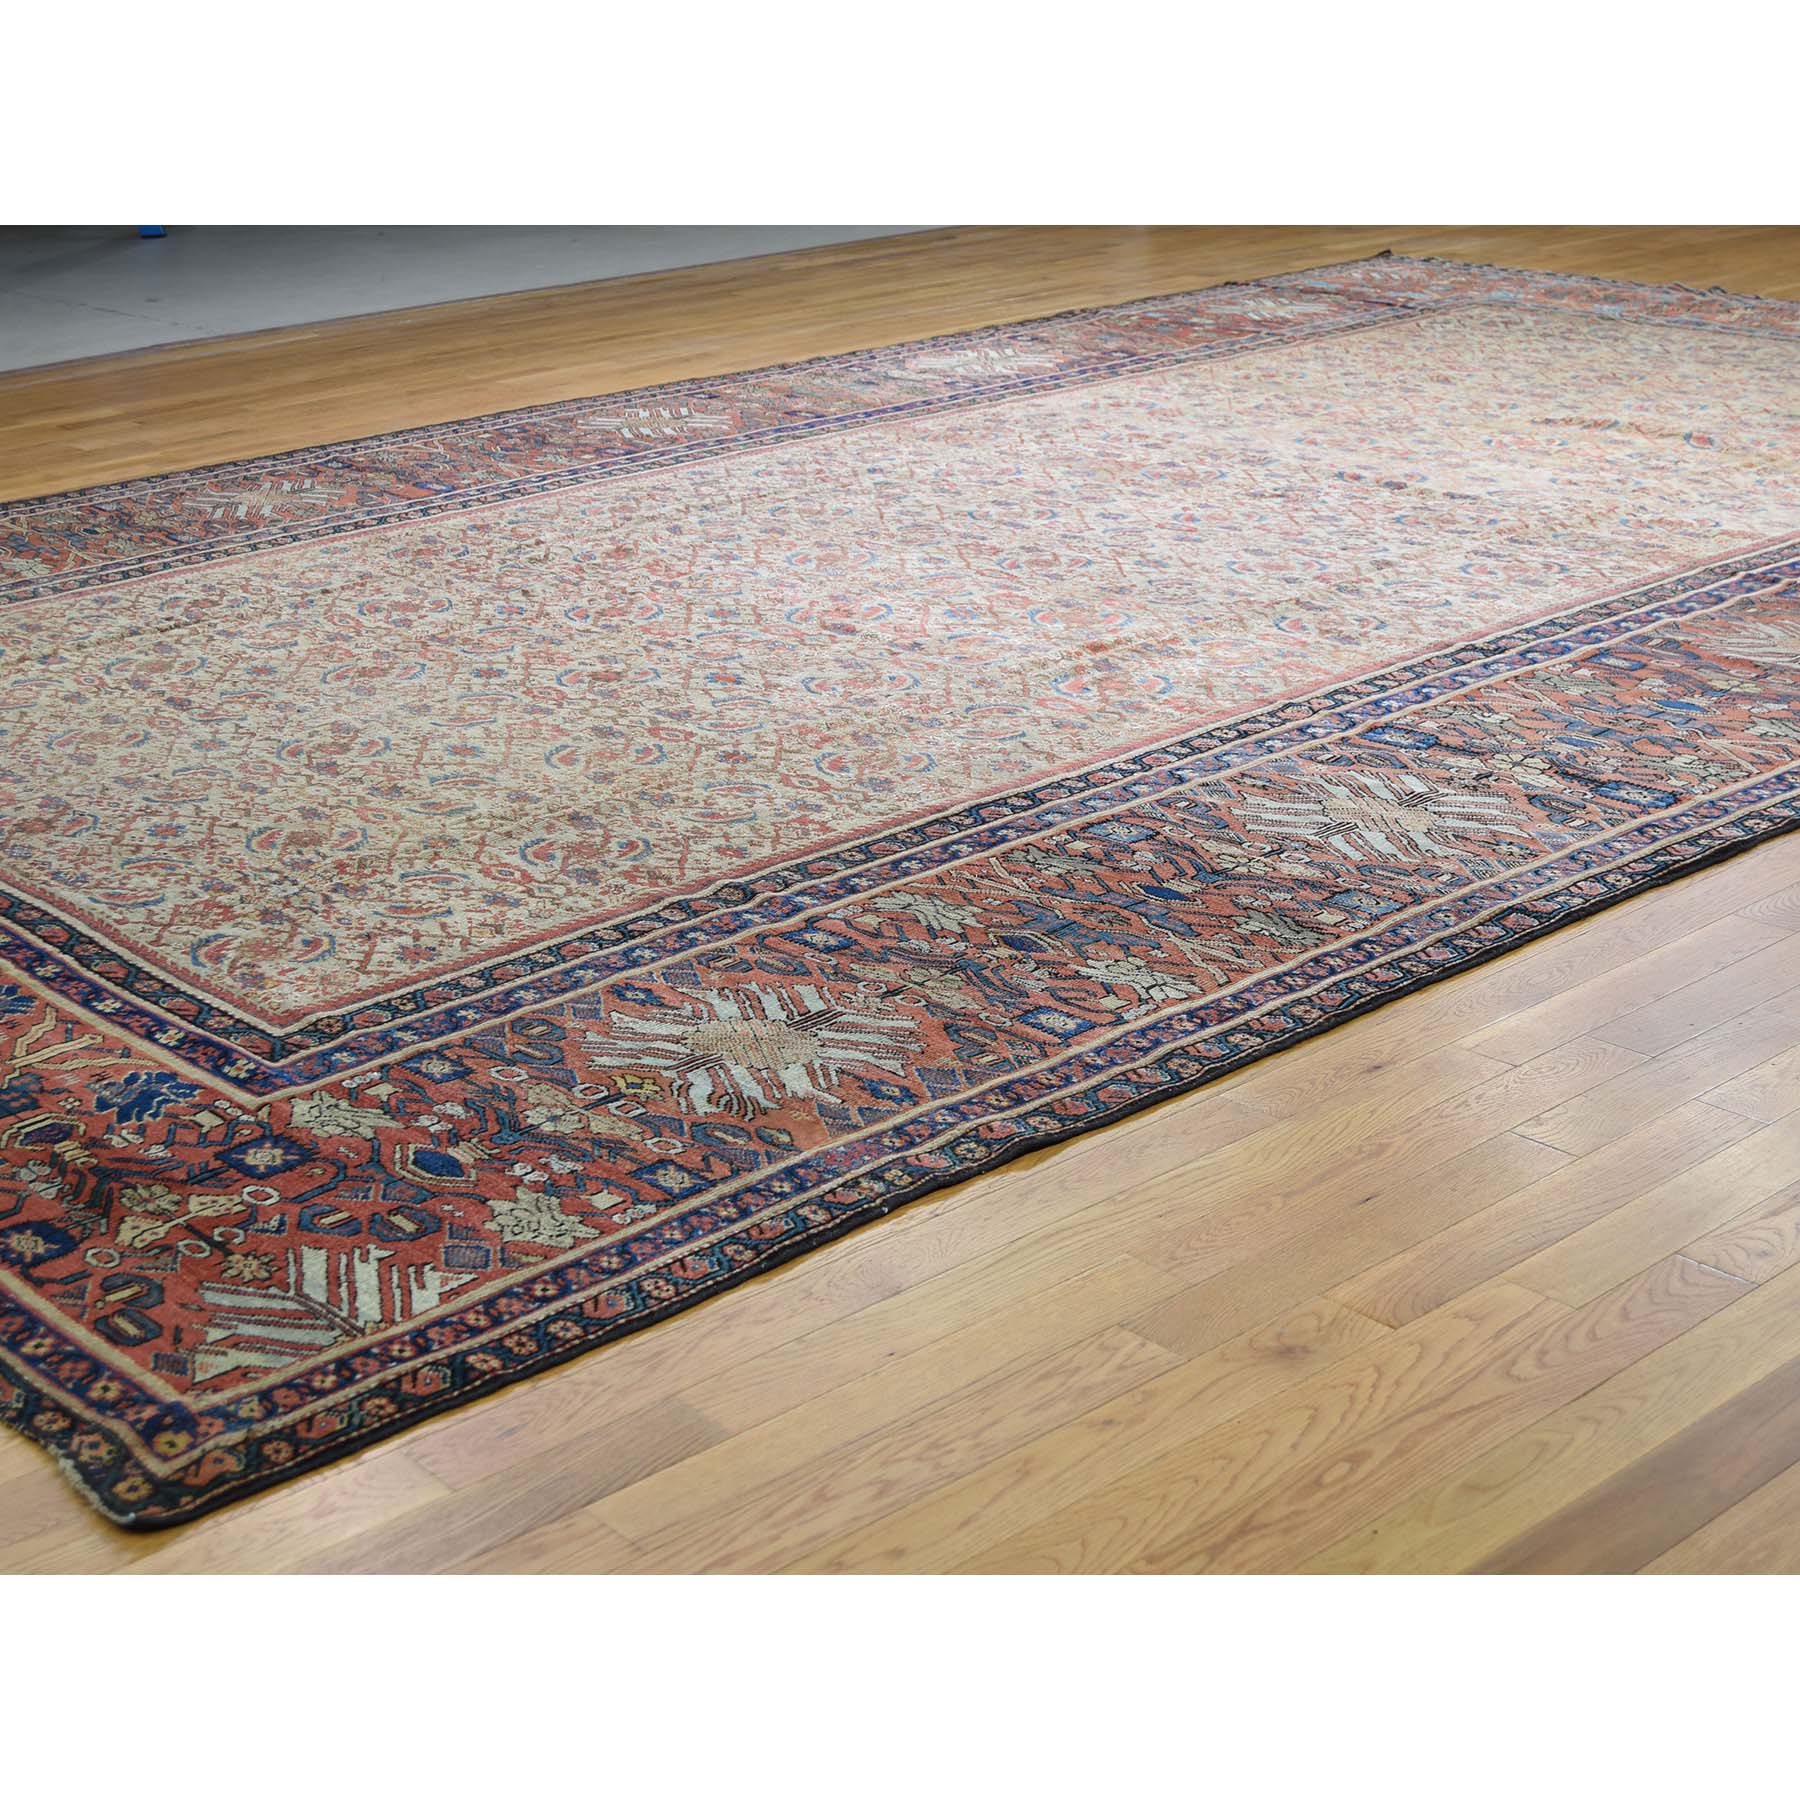 12'x18'3" Antique Persian Mahal Exc Cond Pure Wool Hand Woven Oversized Rug 